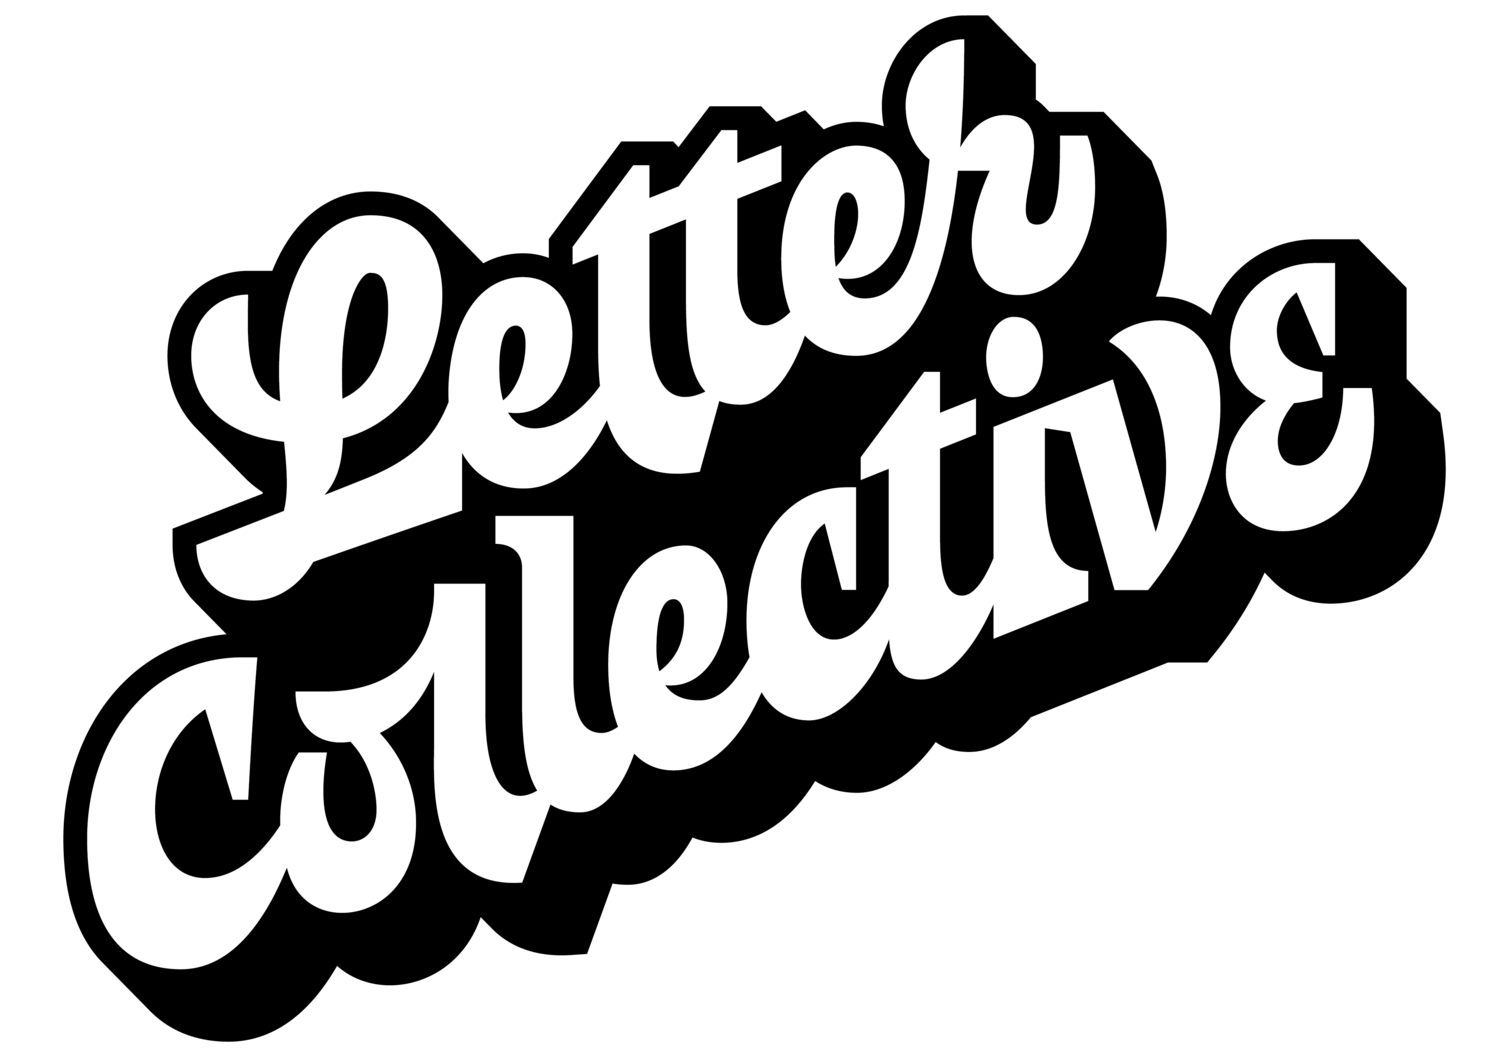 Letter Collective